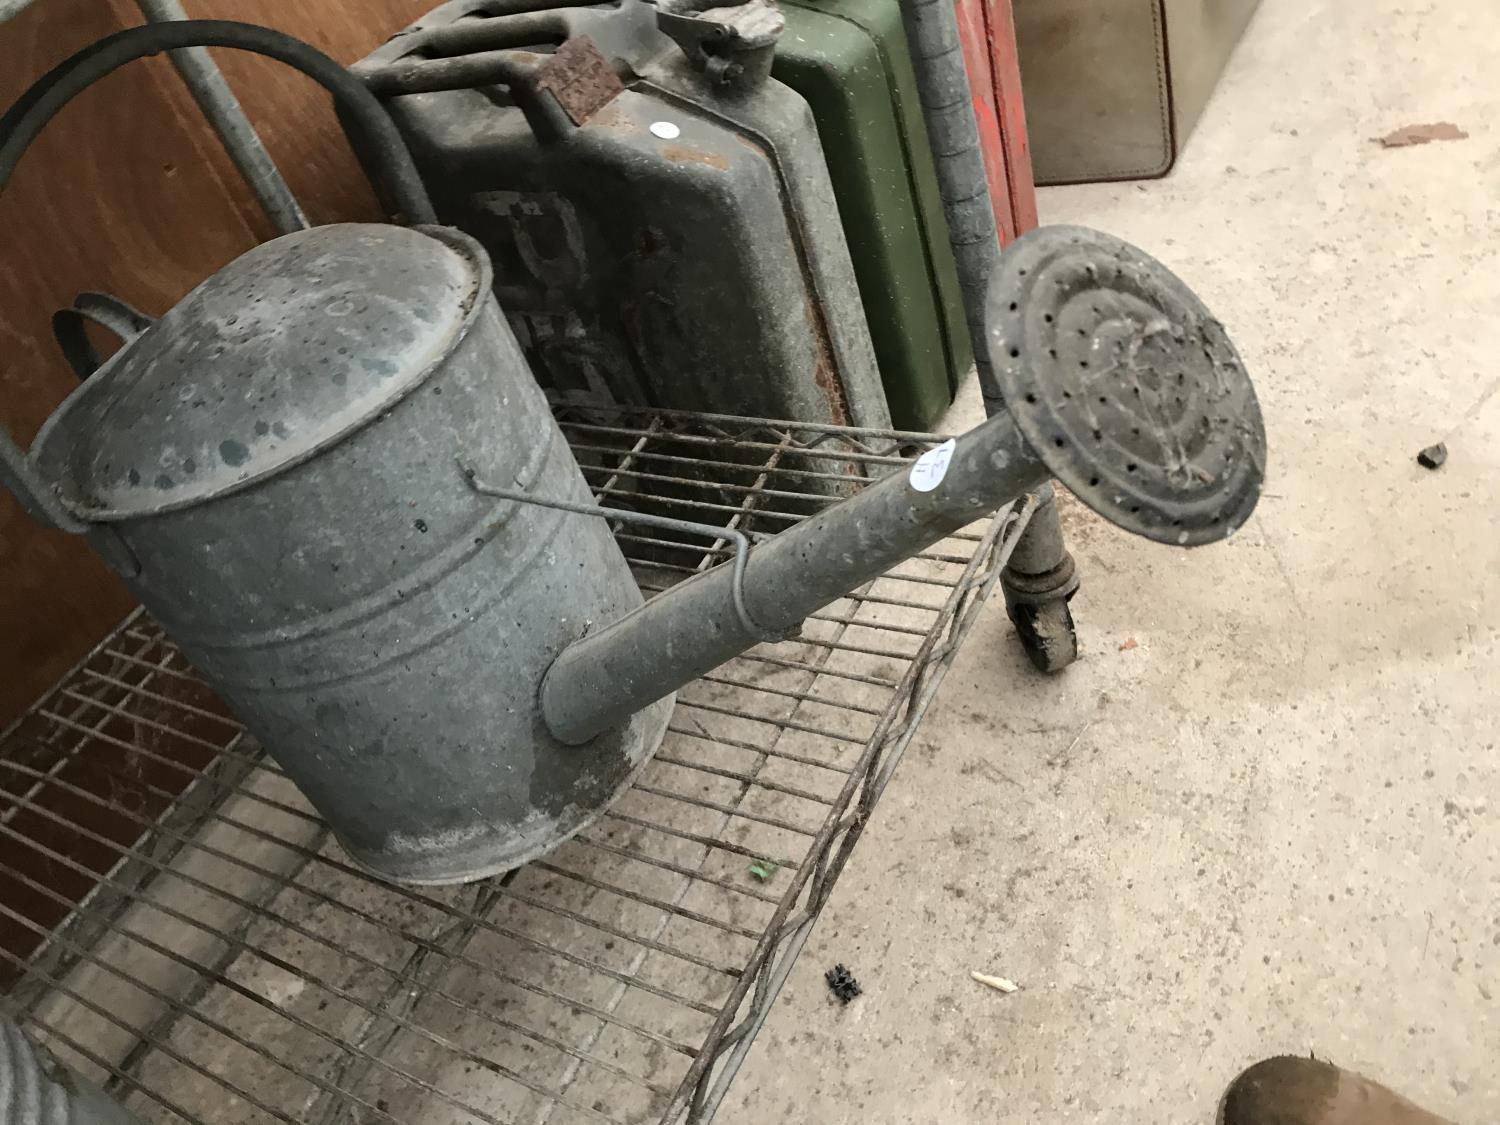 TWO VINTAGE GALVANISED WATERING CANS - Image 4 of 5